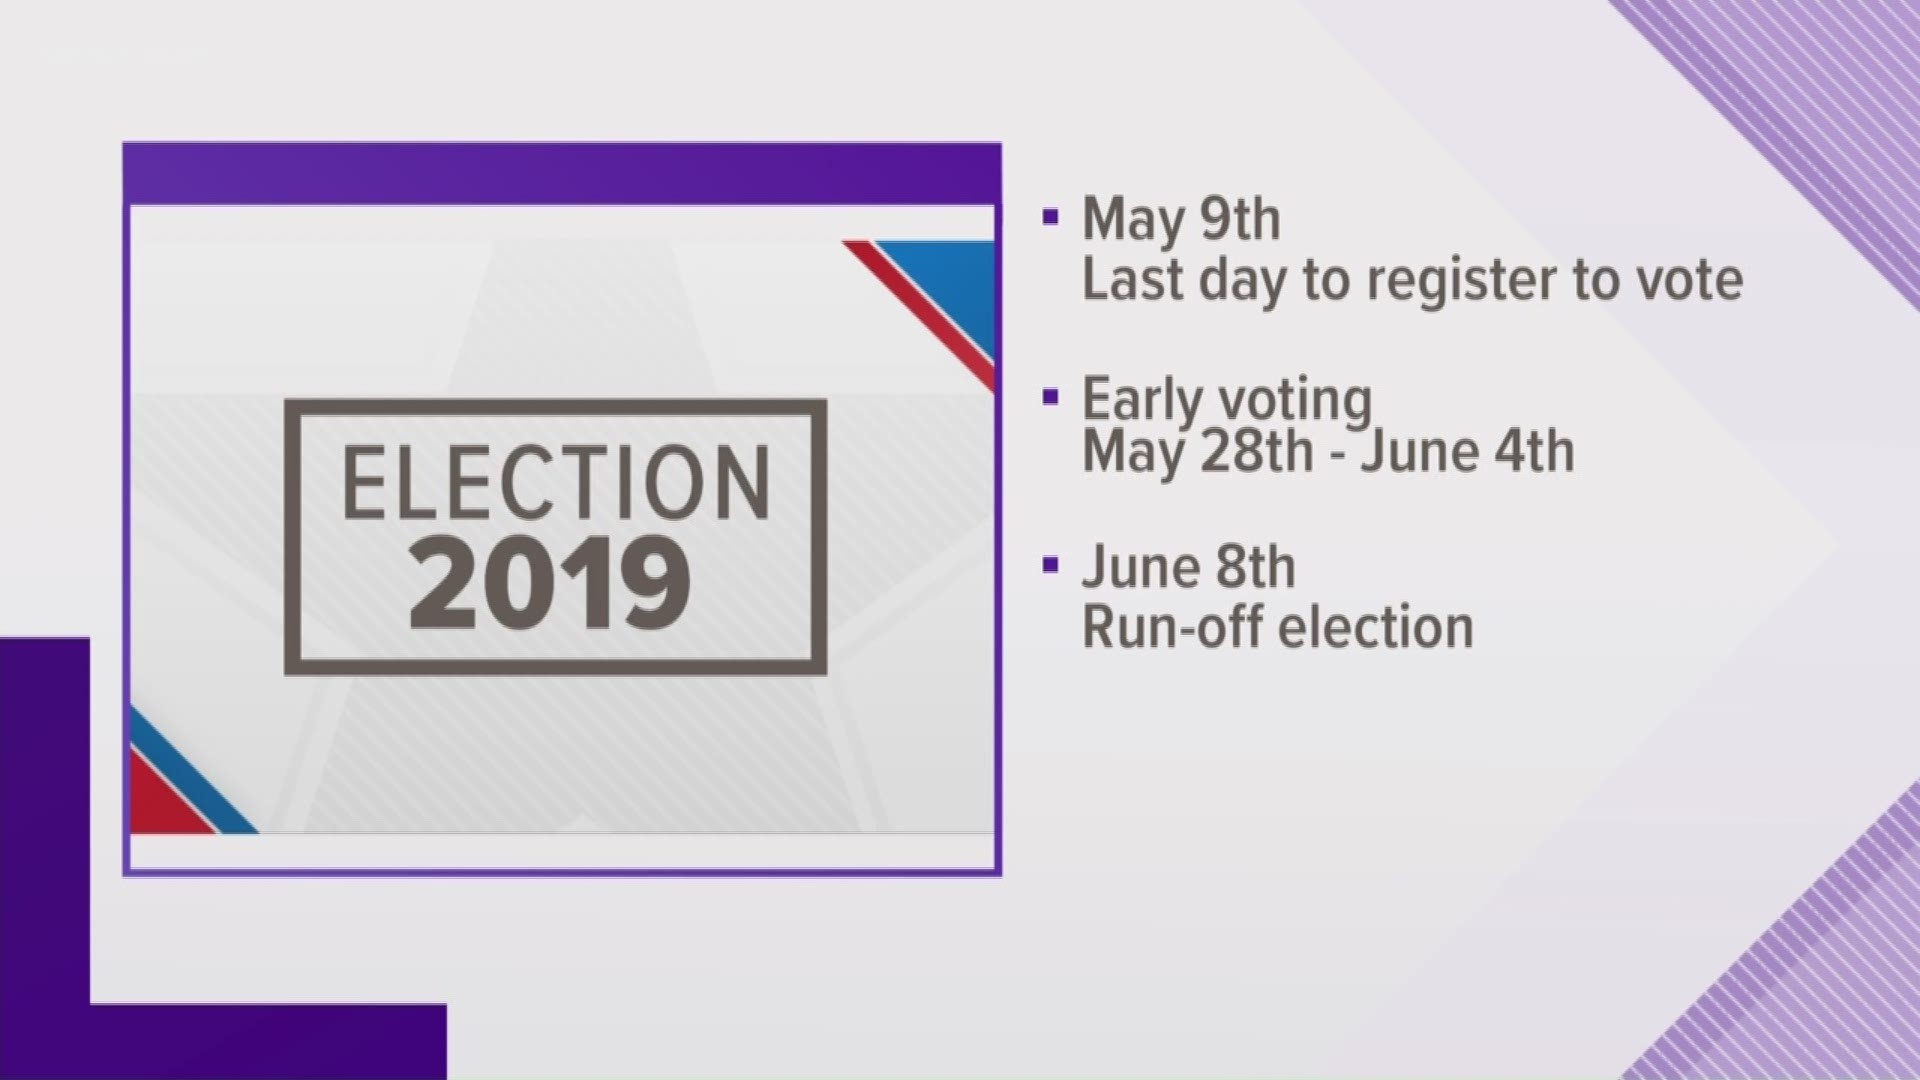 Run-off elections to decide who will be the city's next mayor - as well as who takes several City Council positions - will take place on June 8, and San Antonians who want to take part in those elections have until Thursday, May 9, to register to vote.